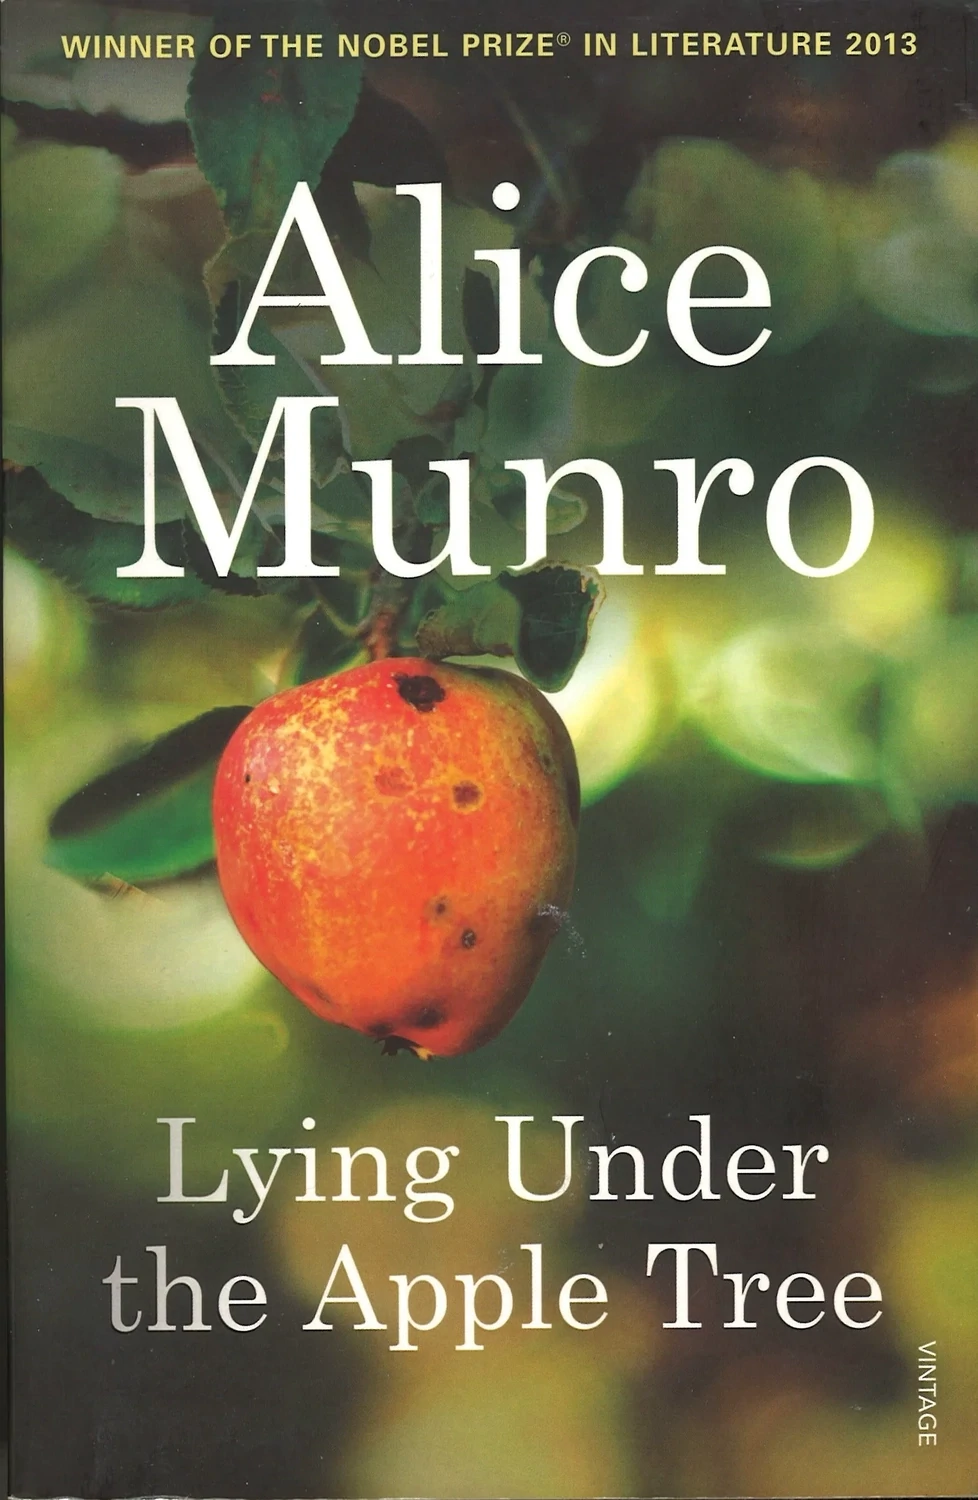 Lying Under The Apple Tree by Alice Munro